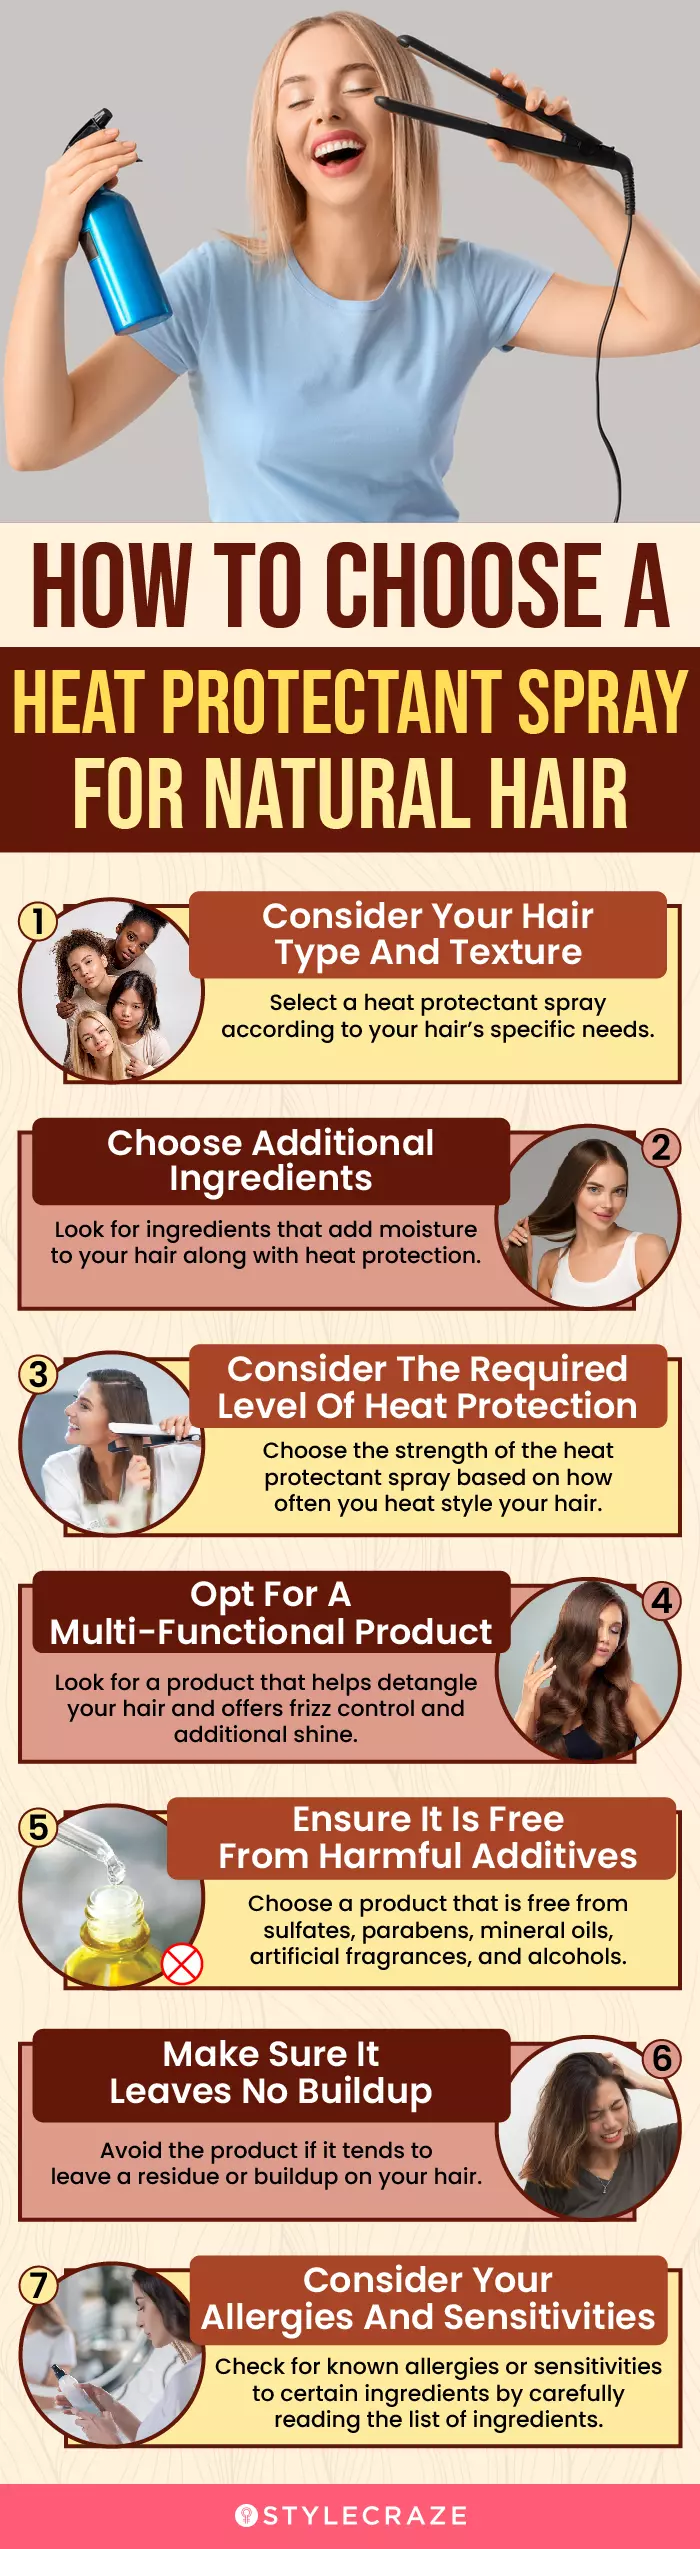 How To Choose A Heat Protectant Spray For Natural Hair (infographic)